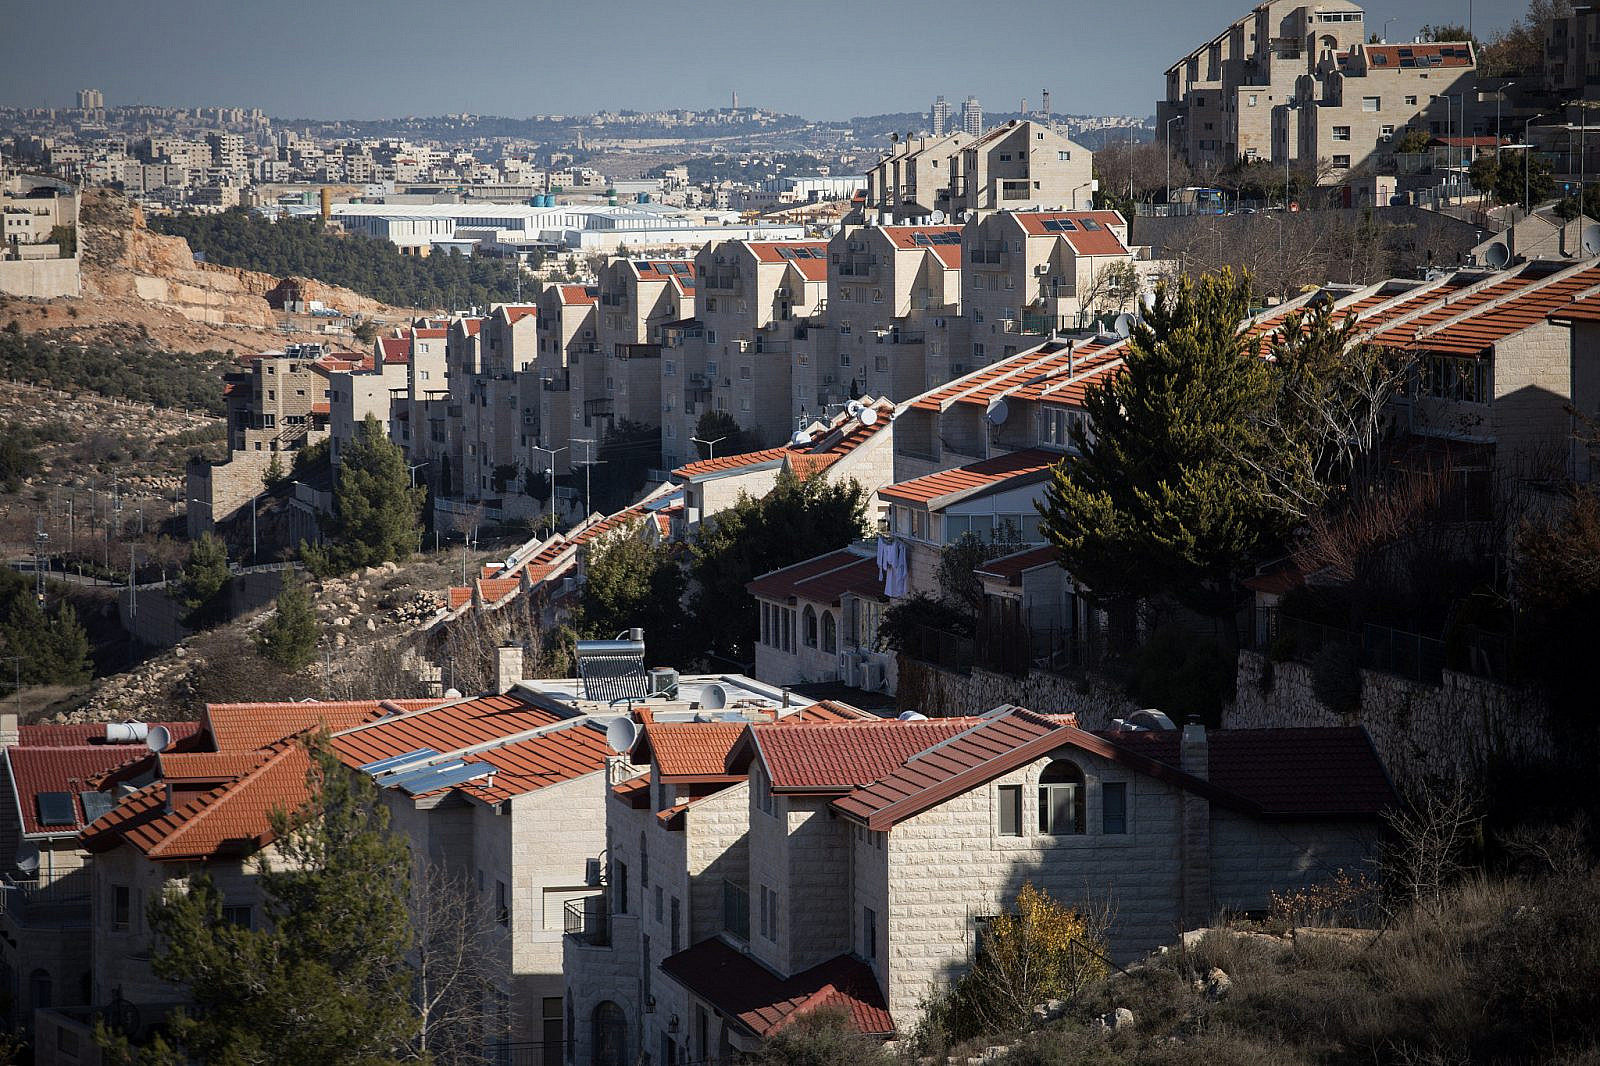 View of the Jewish settlement of Efrat, in Gush Etzion, West Bank. January 6, 2020. (Hadas Parush/Flash90)